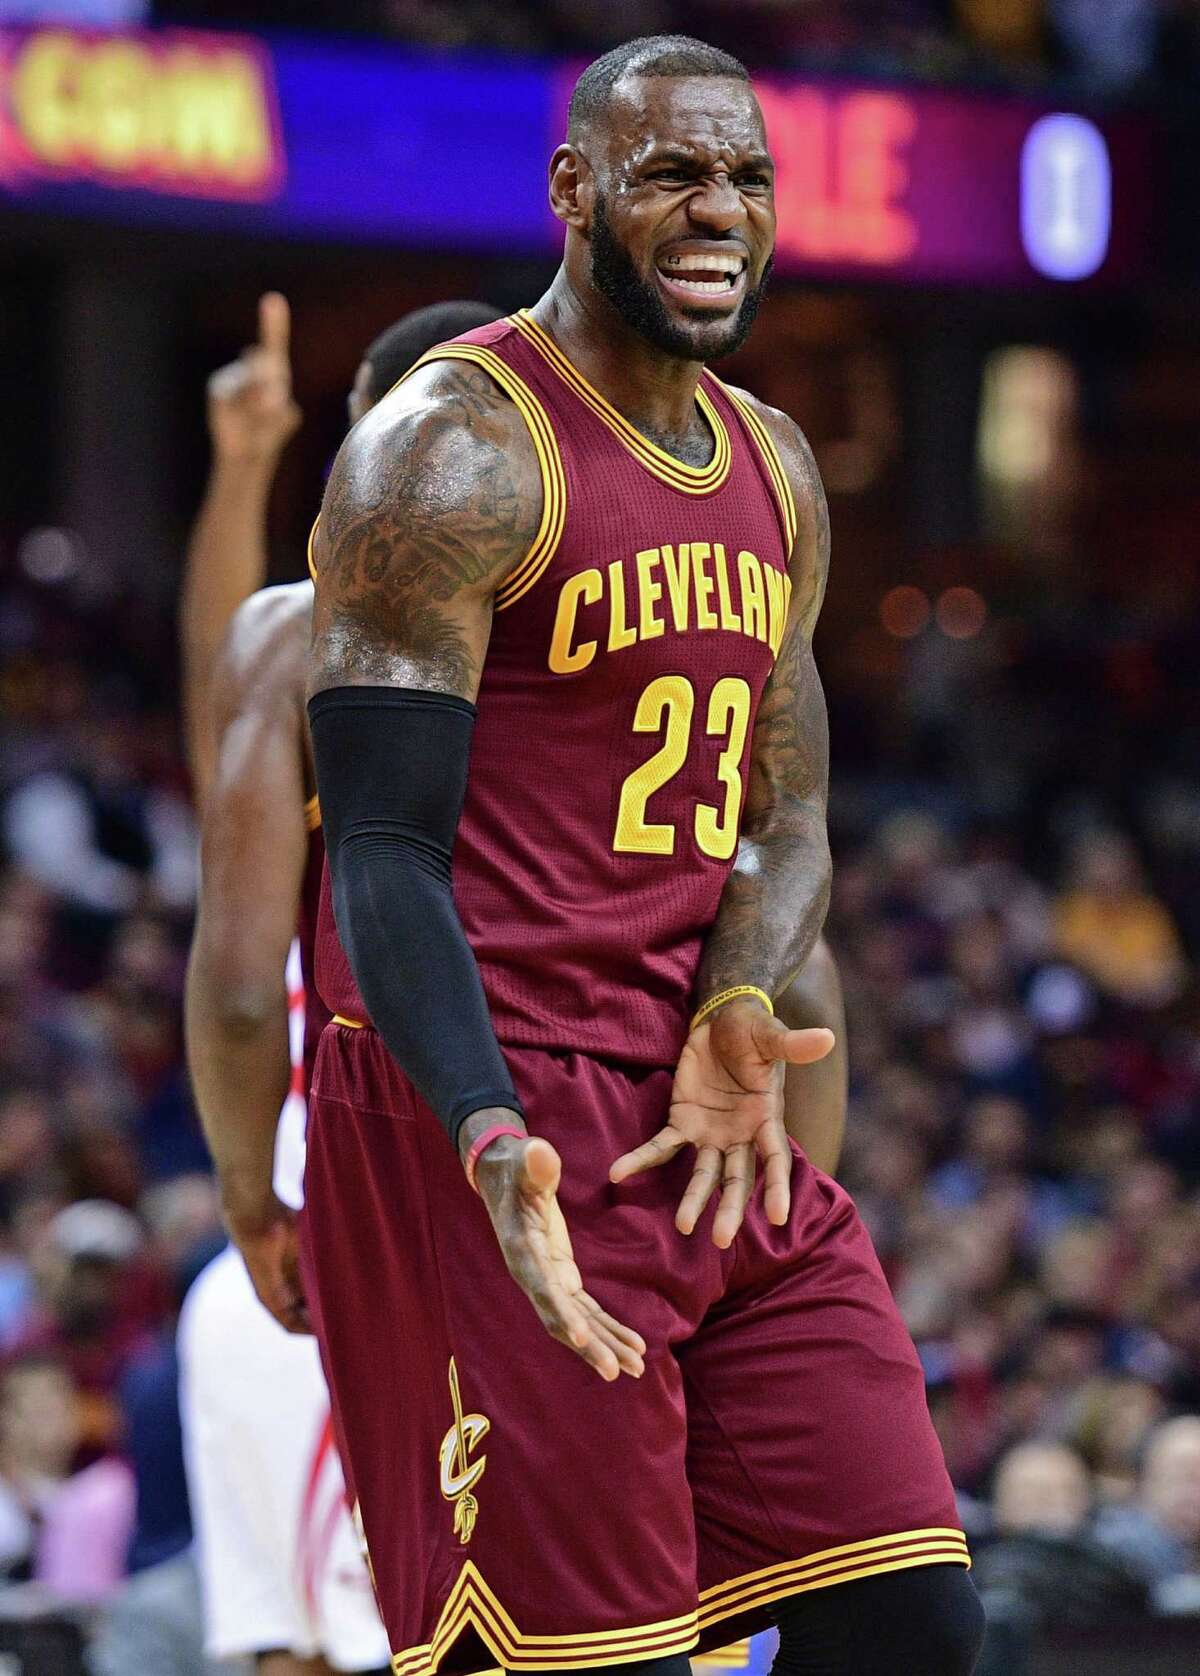 Cleveland Cavaliers forward LeBron James disputes a call with the referee during the first half of an NBA basketball game Tuesday, Nov. 1, 2016, in Cleveland. (AP Photo/David Dermer)